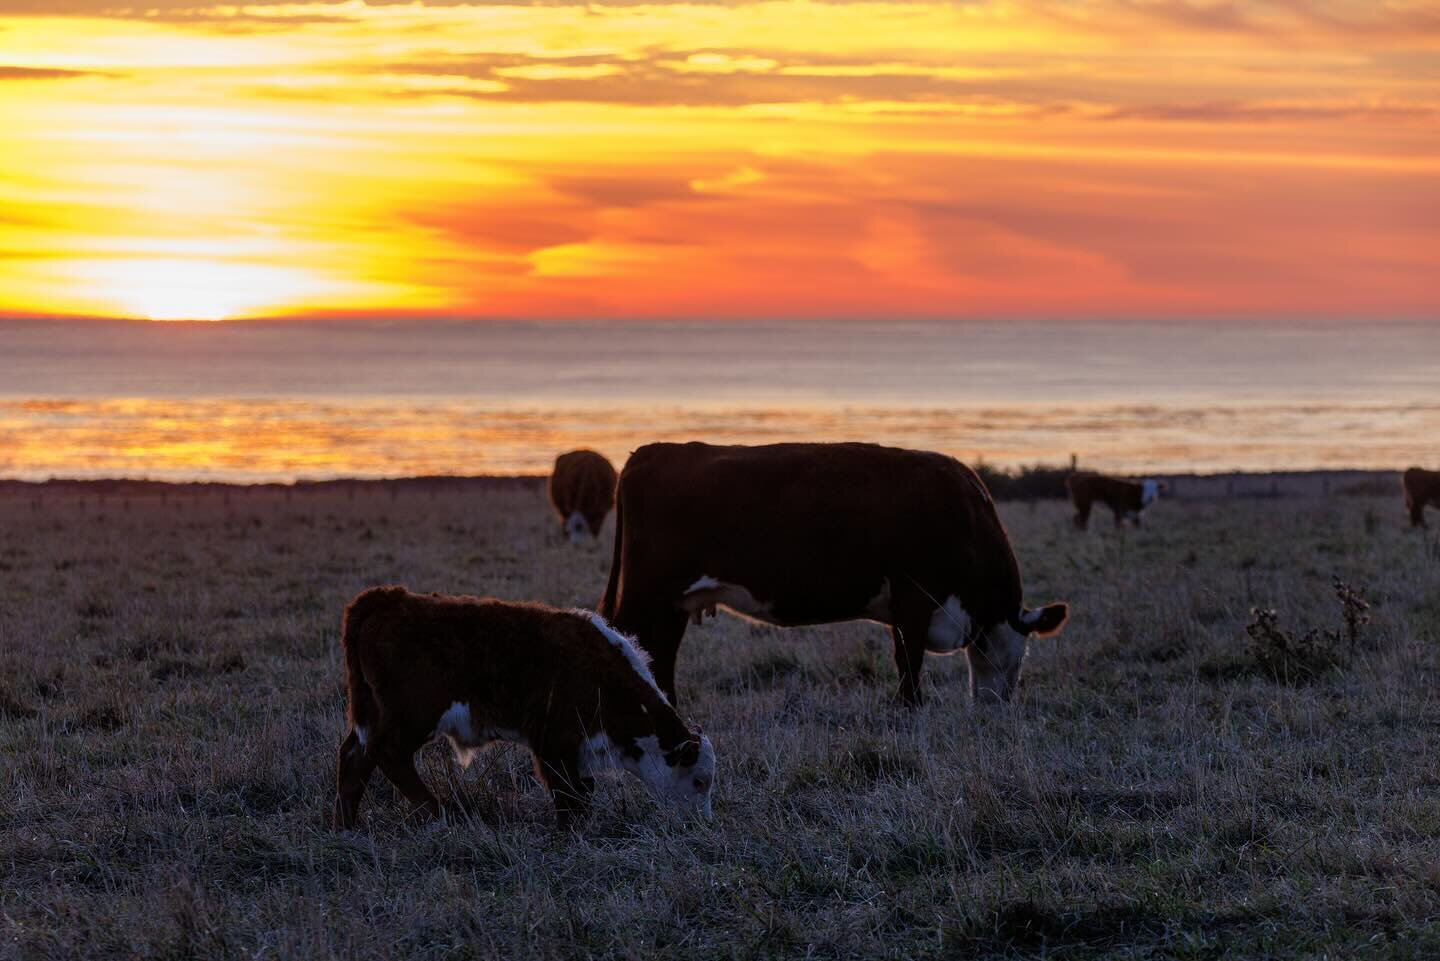 Epic highway 1 sunset + cows 
#cowabunga #highway1 #californiacoast 

#roadtrip #sunset #cow #ocean #landscapephotography #canon #canonphotographer #r5 #cattle #bigsur #coast #pacificcoast @highway1roadtrip @canonusa